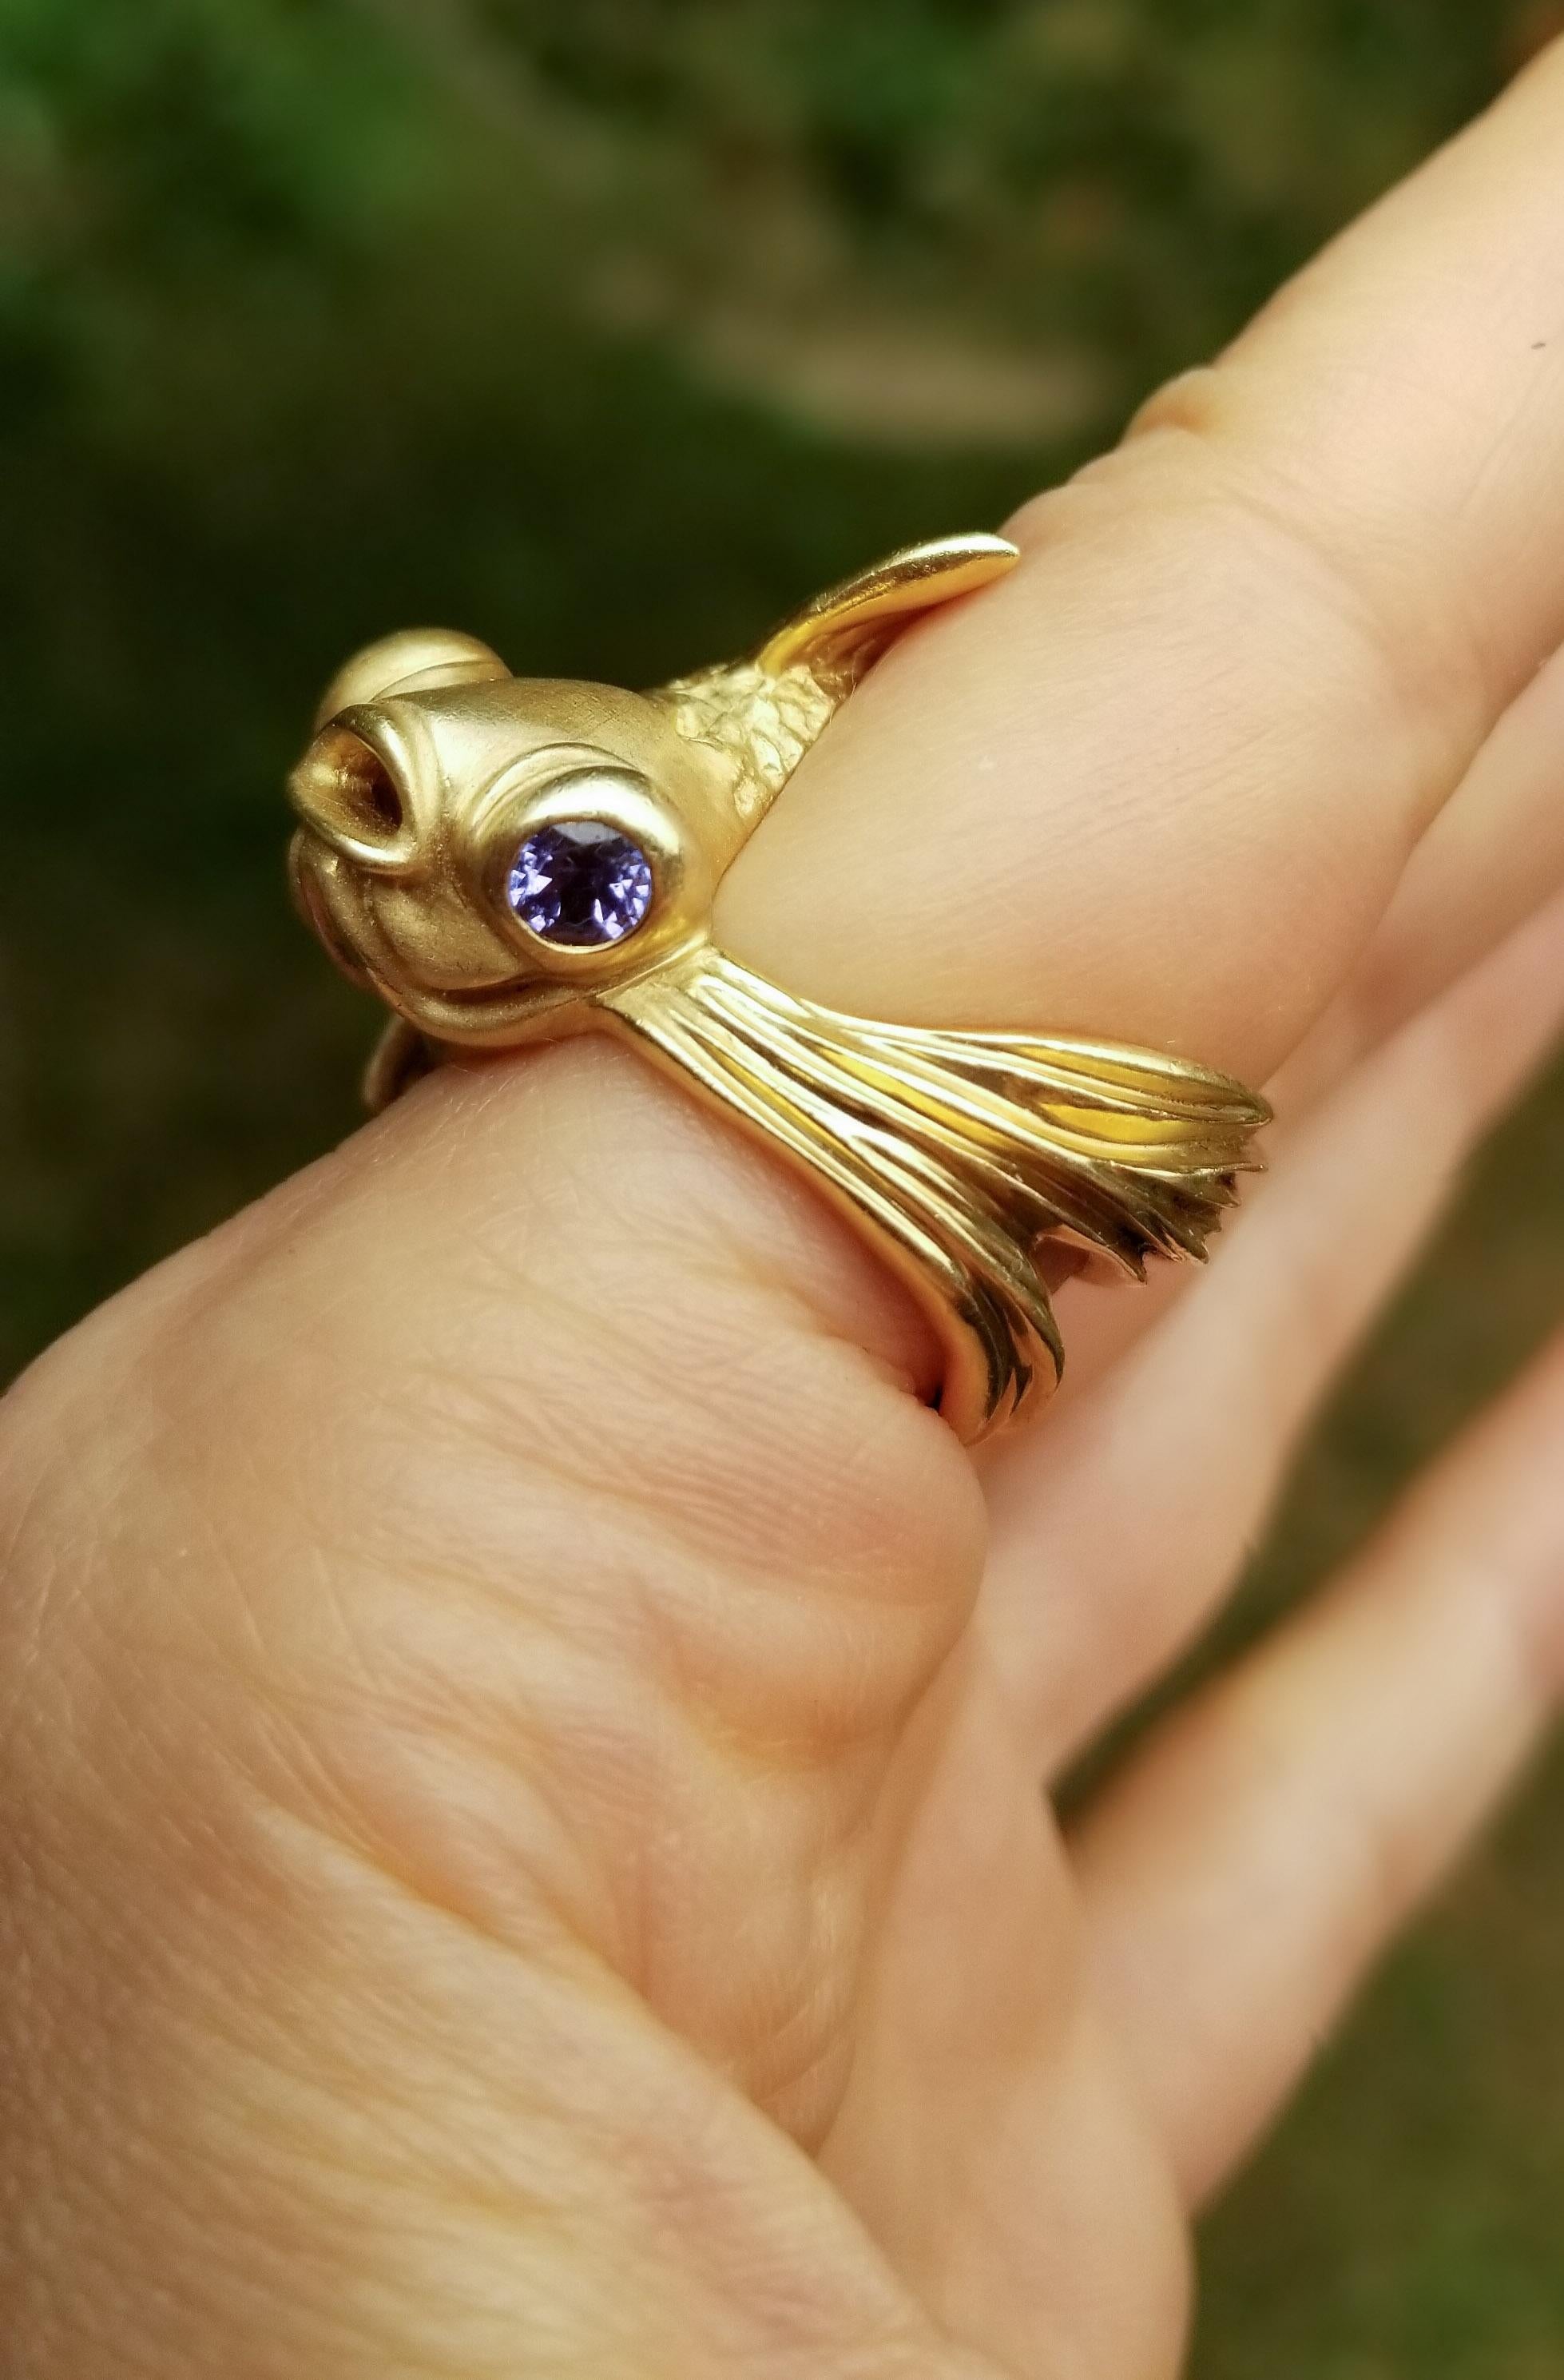 18ky gold, tanzanites, diamonds. One-of-a-kind.

A symbol of good luck, good fortune, and fortitude, this Goldfish swims by on the wearer's hand, his gold body glistening and his tanzanite eyes sparkling.
His sinuous body wraps gracefully around a